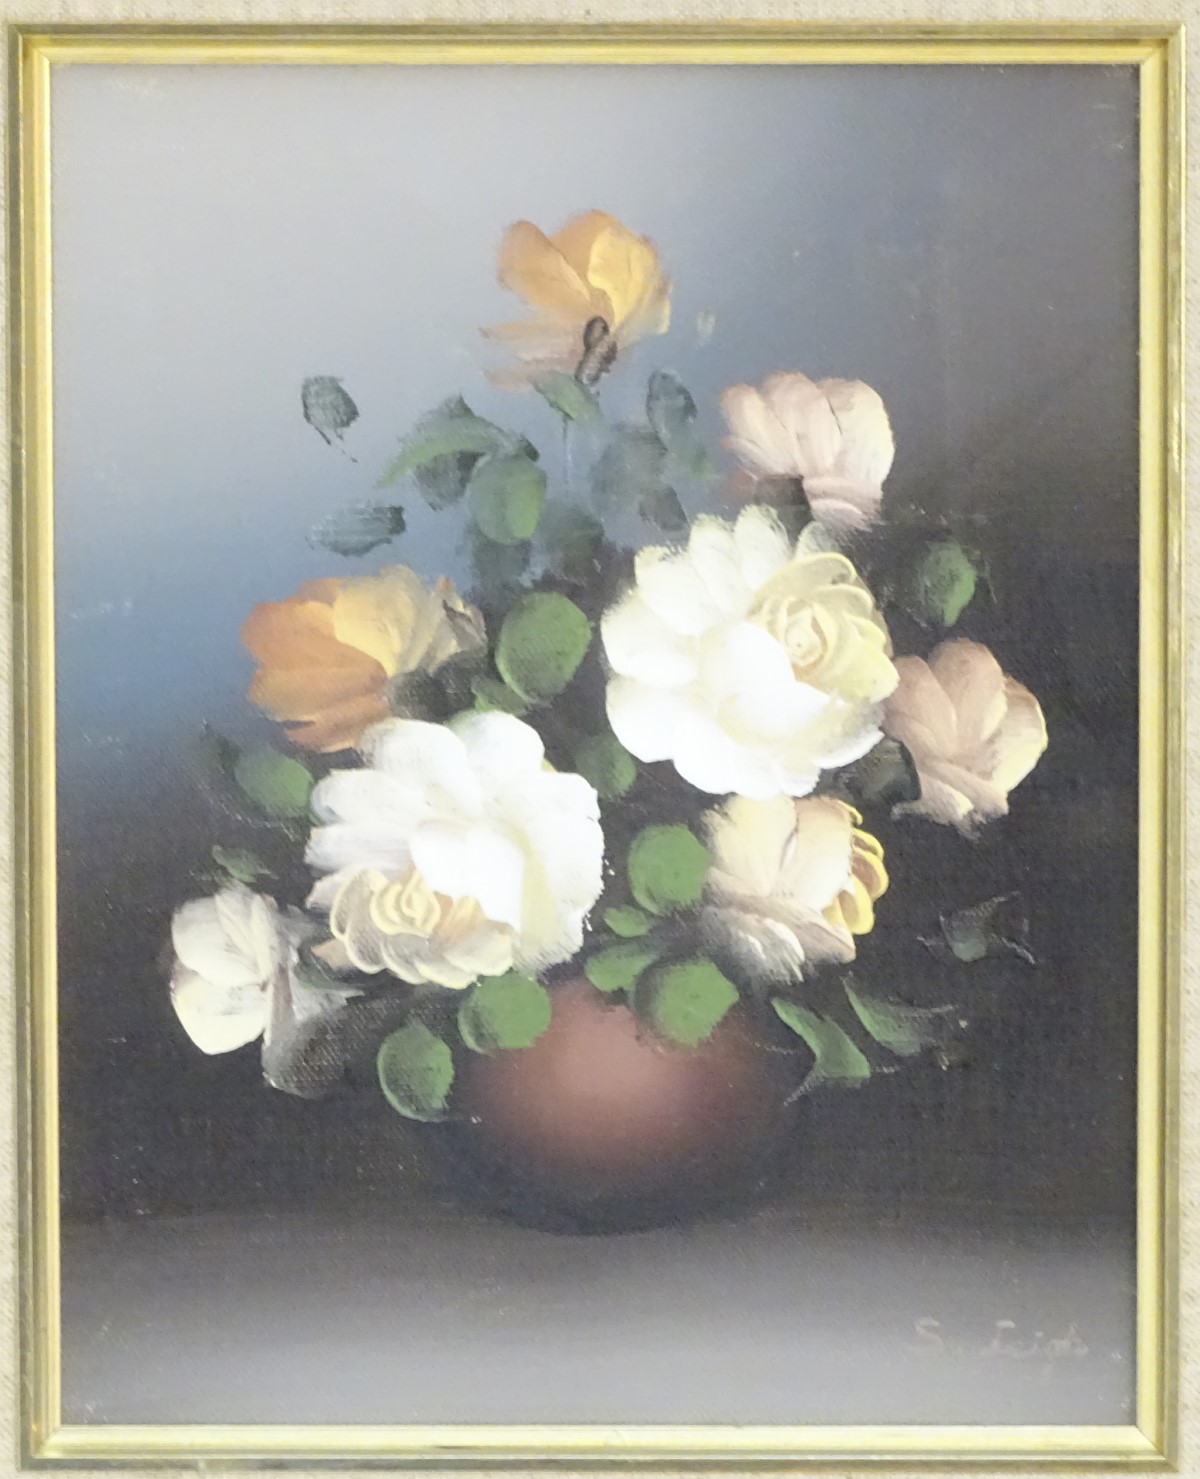 S. Leigh, XX, Oil on canvas, A still life study of flowers in a vase. Signed lower right. Approx. - Image 5 of 11